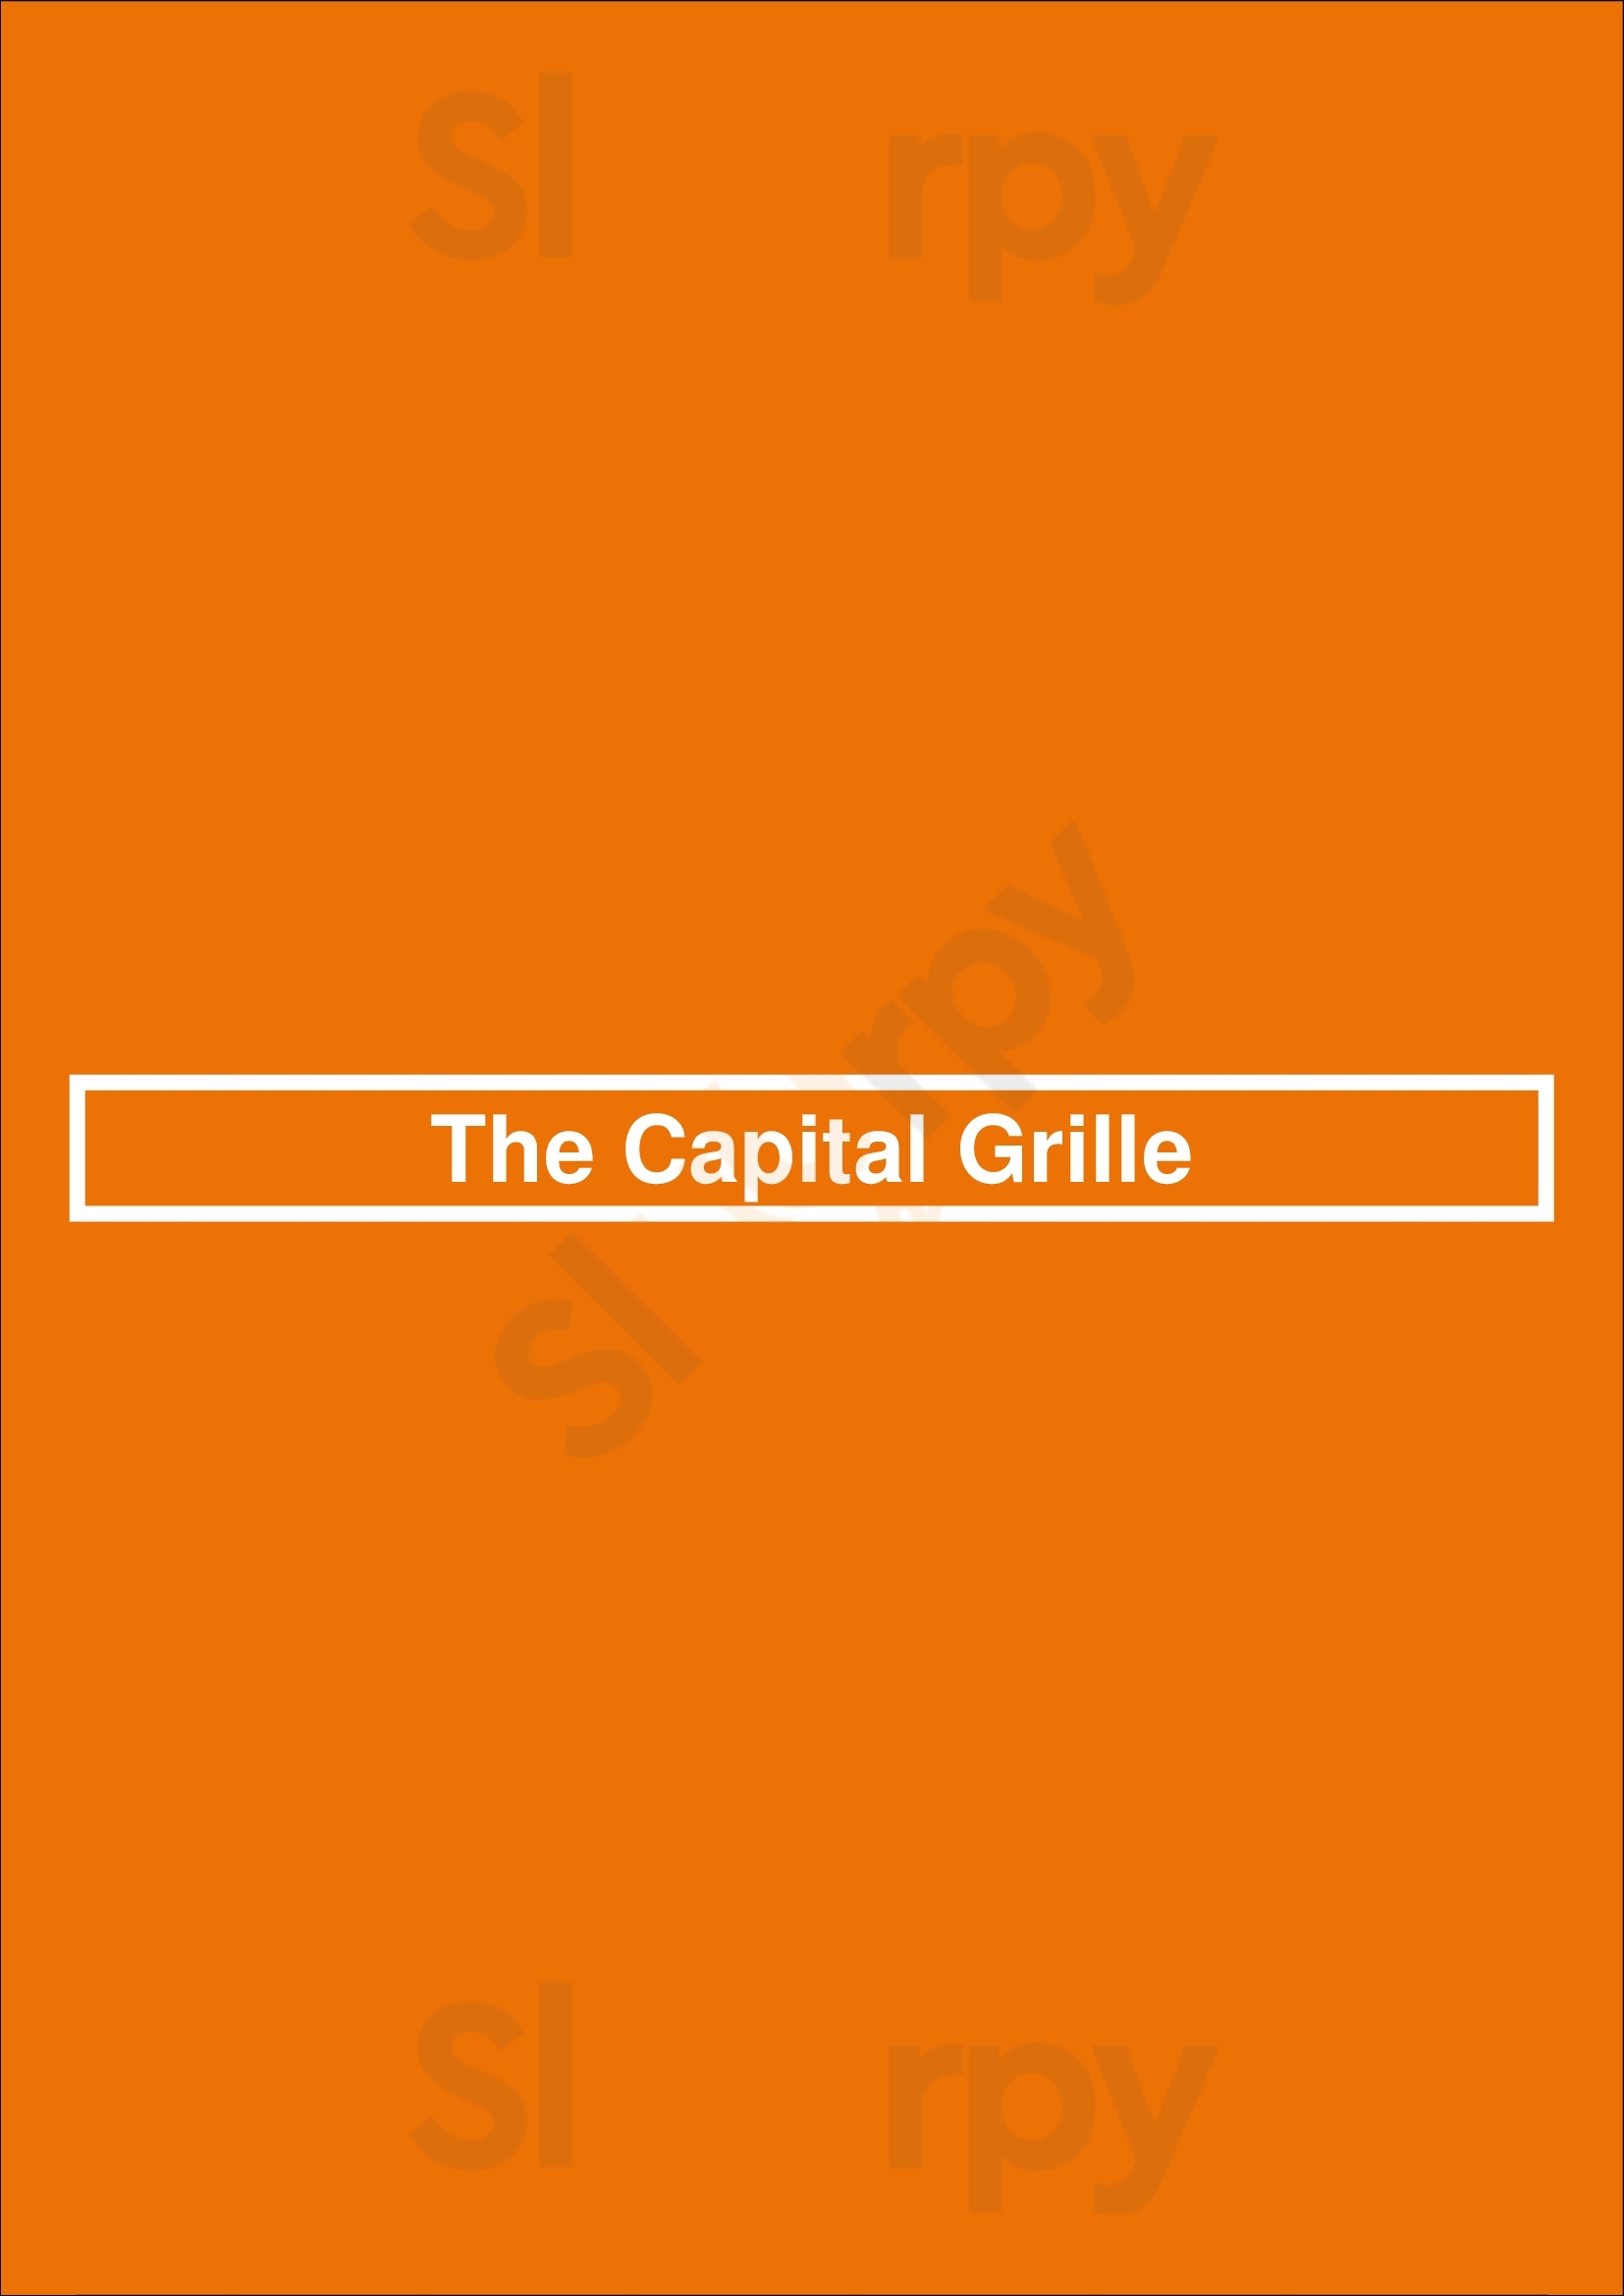 The Capital Grille Seattle Menu - 1